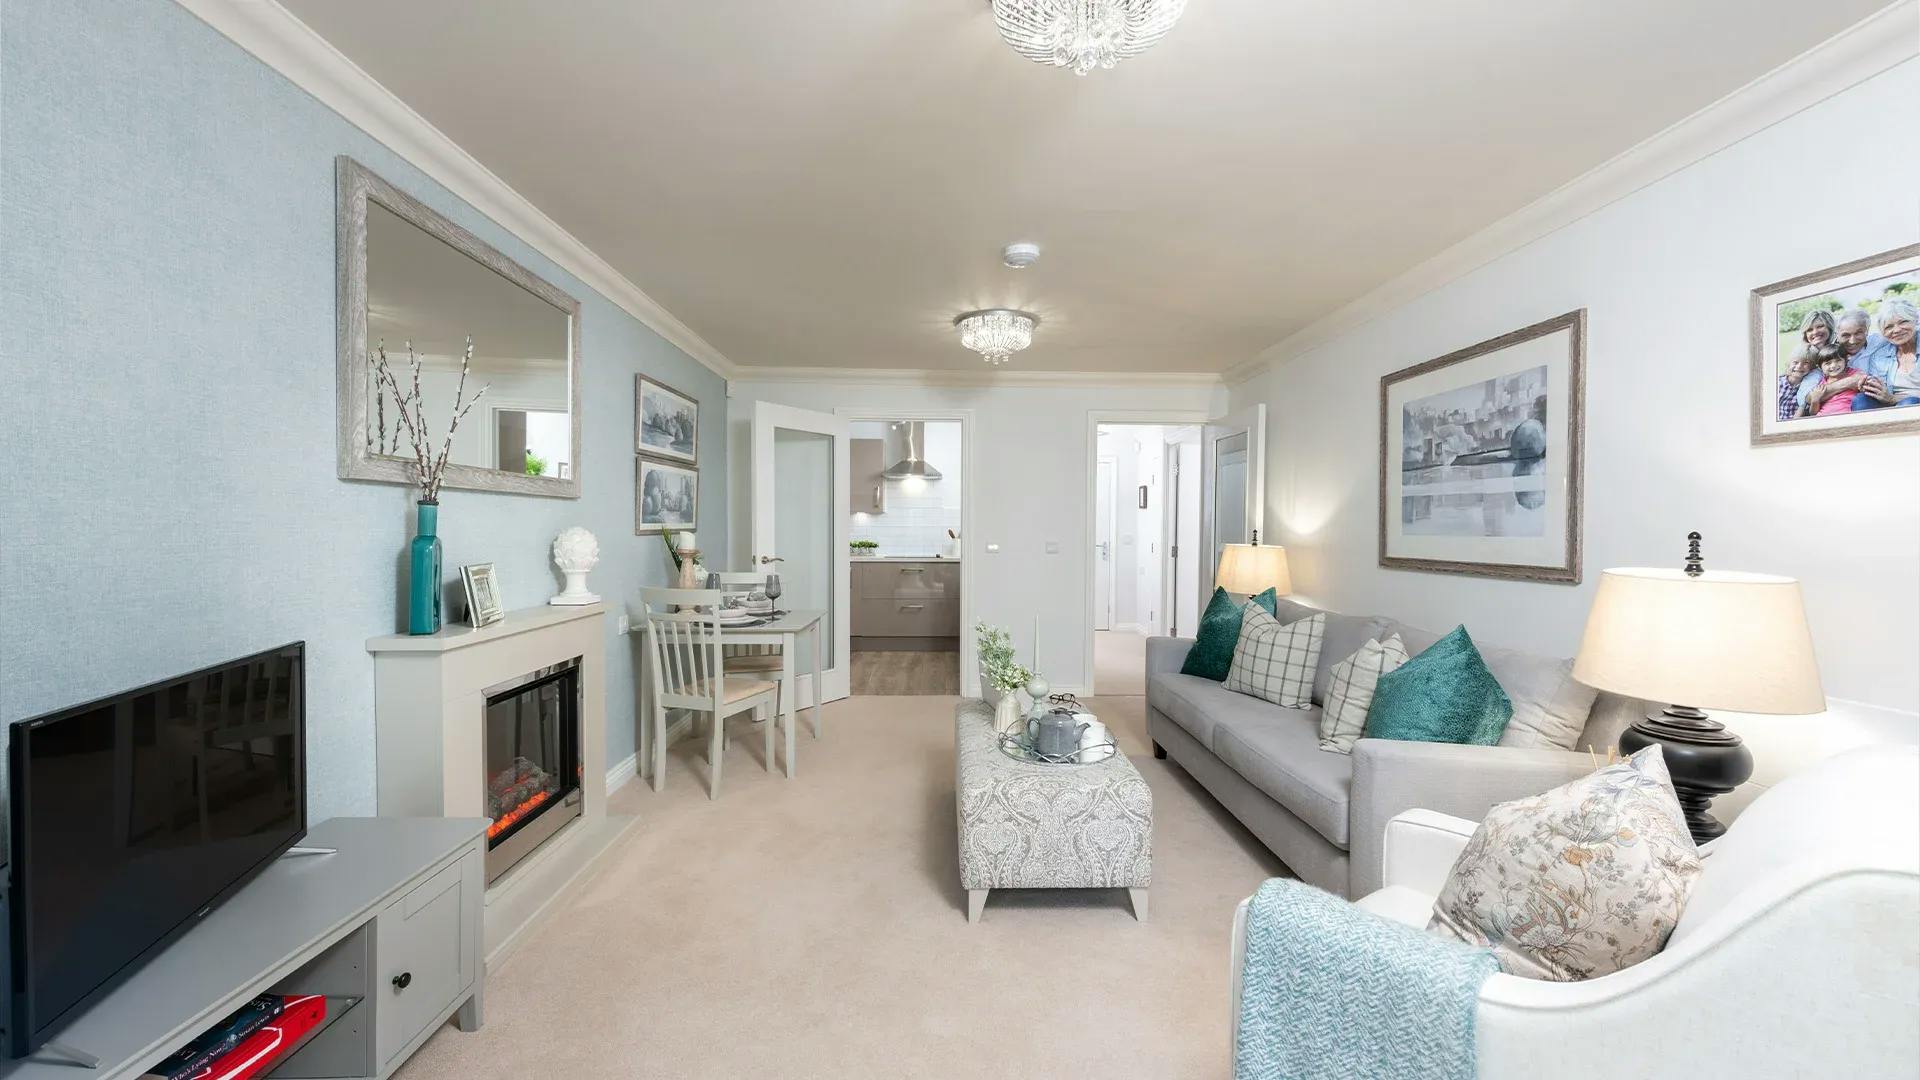 Living Room at Charrington Lodge retirement development in Oxted, Surrey